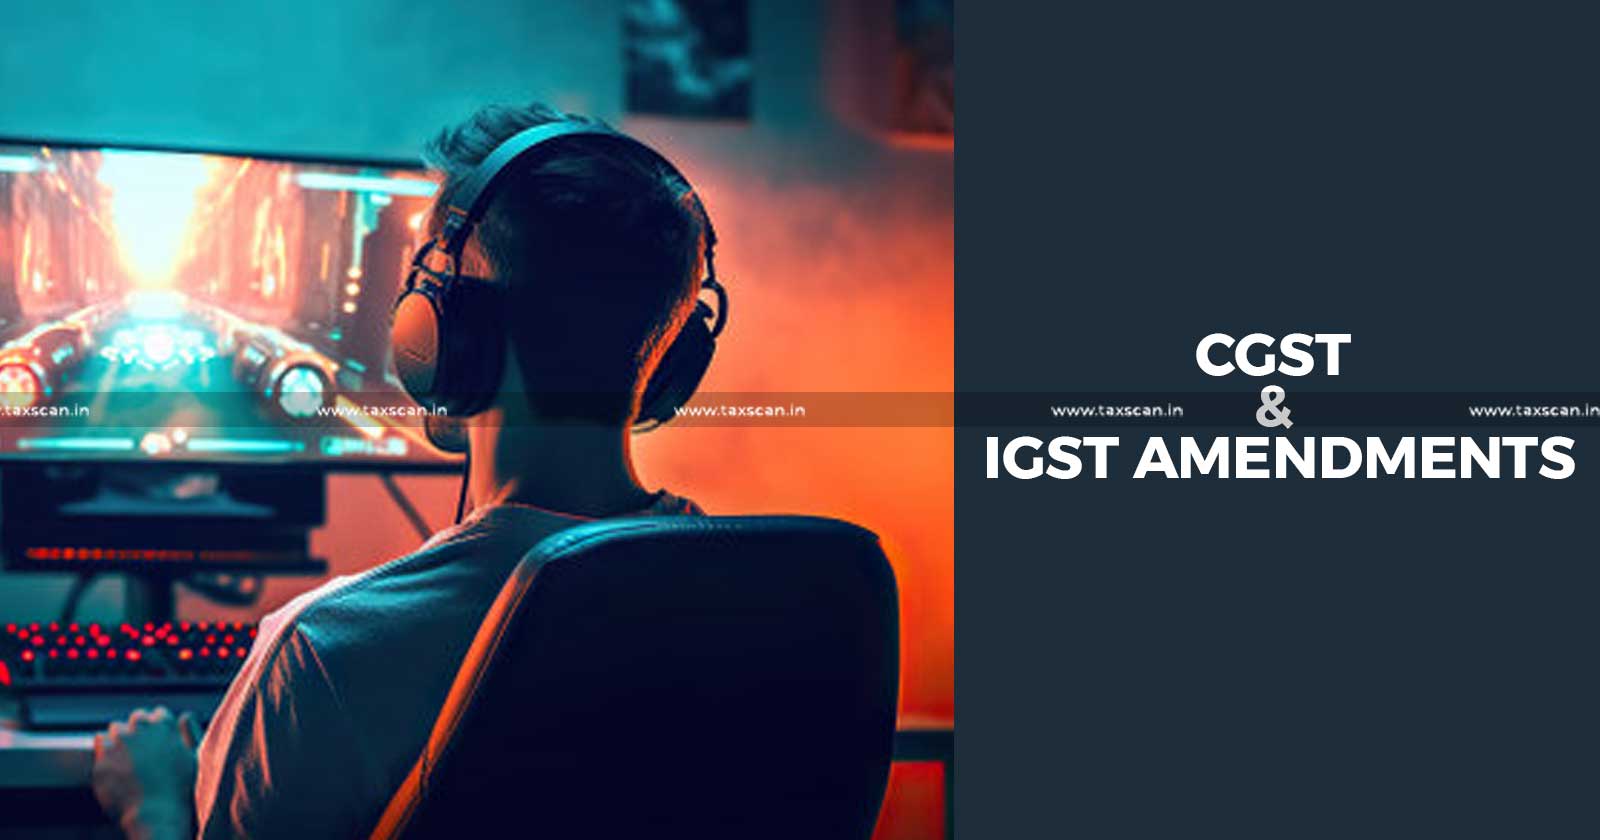 Central Government - Online Gaming - Online Gaming Amendments - CGST & IGST Acts - IGST Acts - taxscan